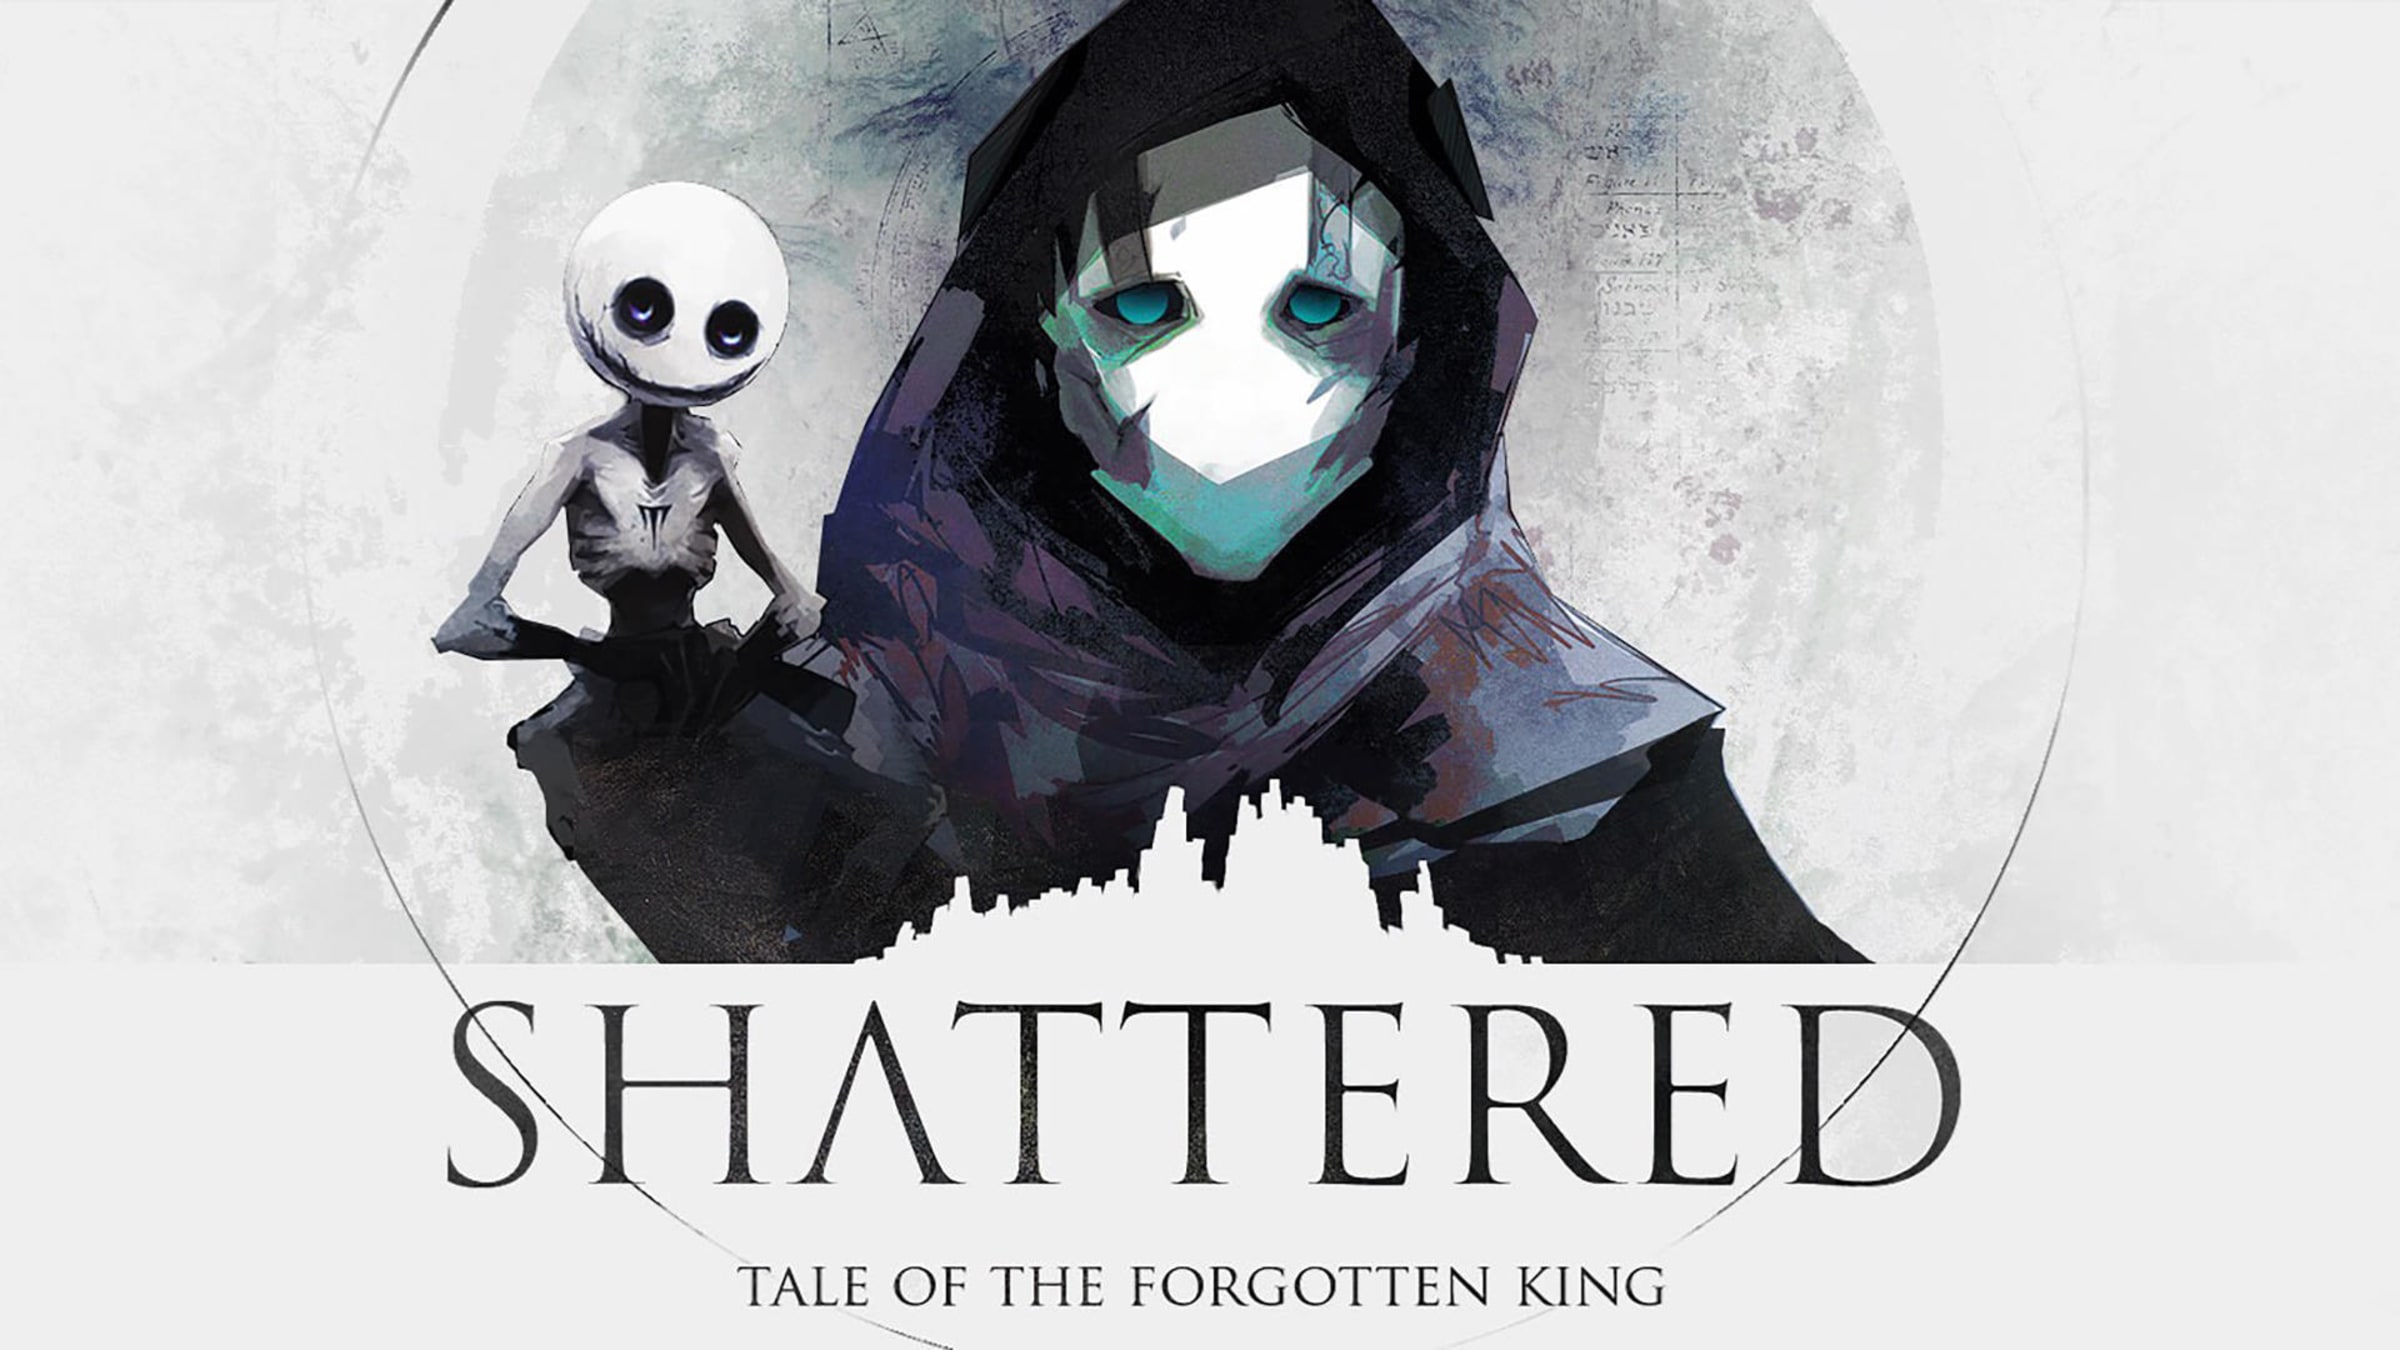 Shattered - Tale of the Forgotten King on